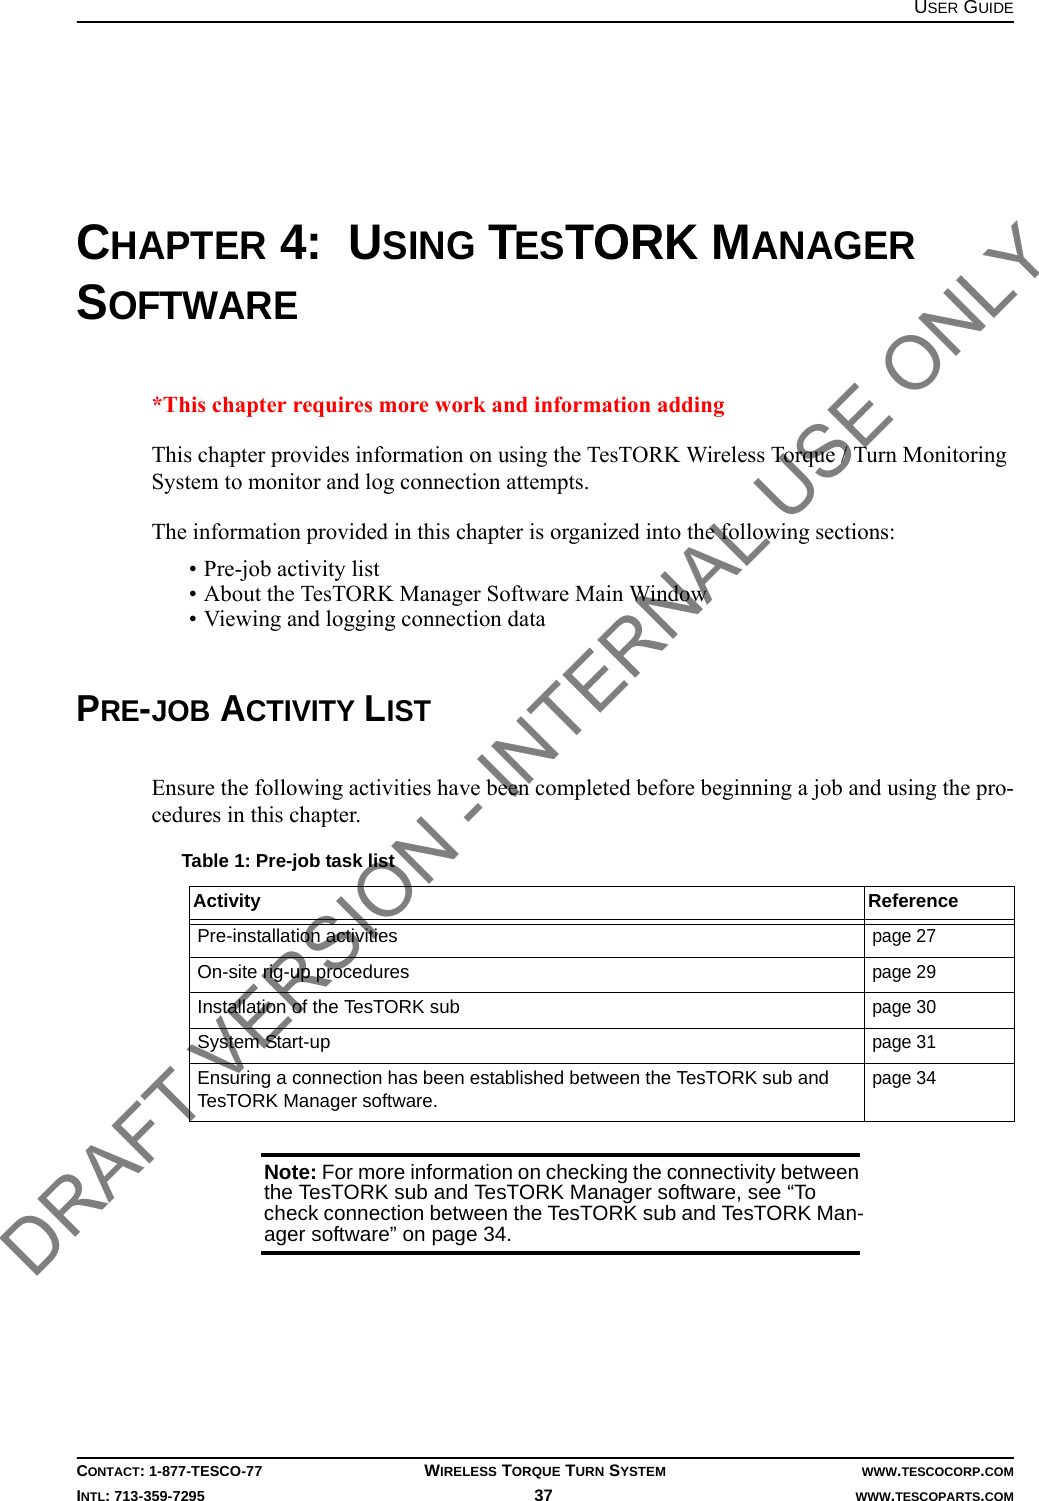 USER GUIDECONTACT: 1-877-TESCO-77 WIRELESS TORQUE TURN SYSTEM WWW.TESCOCORP.COMINTL: 713-359-7295 37    WWW.TESCOPARTS.COMCHAPTER 4:  USING TESTORK MANAGER SOFTWARE*This chapter requires more work and information addingThis chapter provides information on using the TesTORK Wireless Torque / Turn Monitoring System to monitor and log connection attempts.The information provided in this chapter is organized into the following sections:• Pre-job activity list• About the TesTORK Manager Software Main Window• Viewing and logging connection dataPRE-JOB ACTIVITY LISTEnsure the following activities have been completed before beginning a job and using the pro-cedures in this chapter. Note: For more information on checking the connectivity between the TesTORK sub and TesTORK Manager software, see “To check connection between the TesTORK sub and TesTORK Man-ager software” on page 34.Table 1: Pre-job task listActivity ReferencePre-installation activitiespage 27On-site rig-up procedurespage 29Installation of the TesTORK subpage 30System Start-uppage 31Ensuring a connection has been established between the TesTORK sub and TesTORK Manager software.page 34DRAFT VERSION - INTERNAL USE ONLY